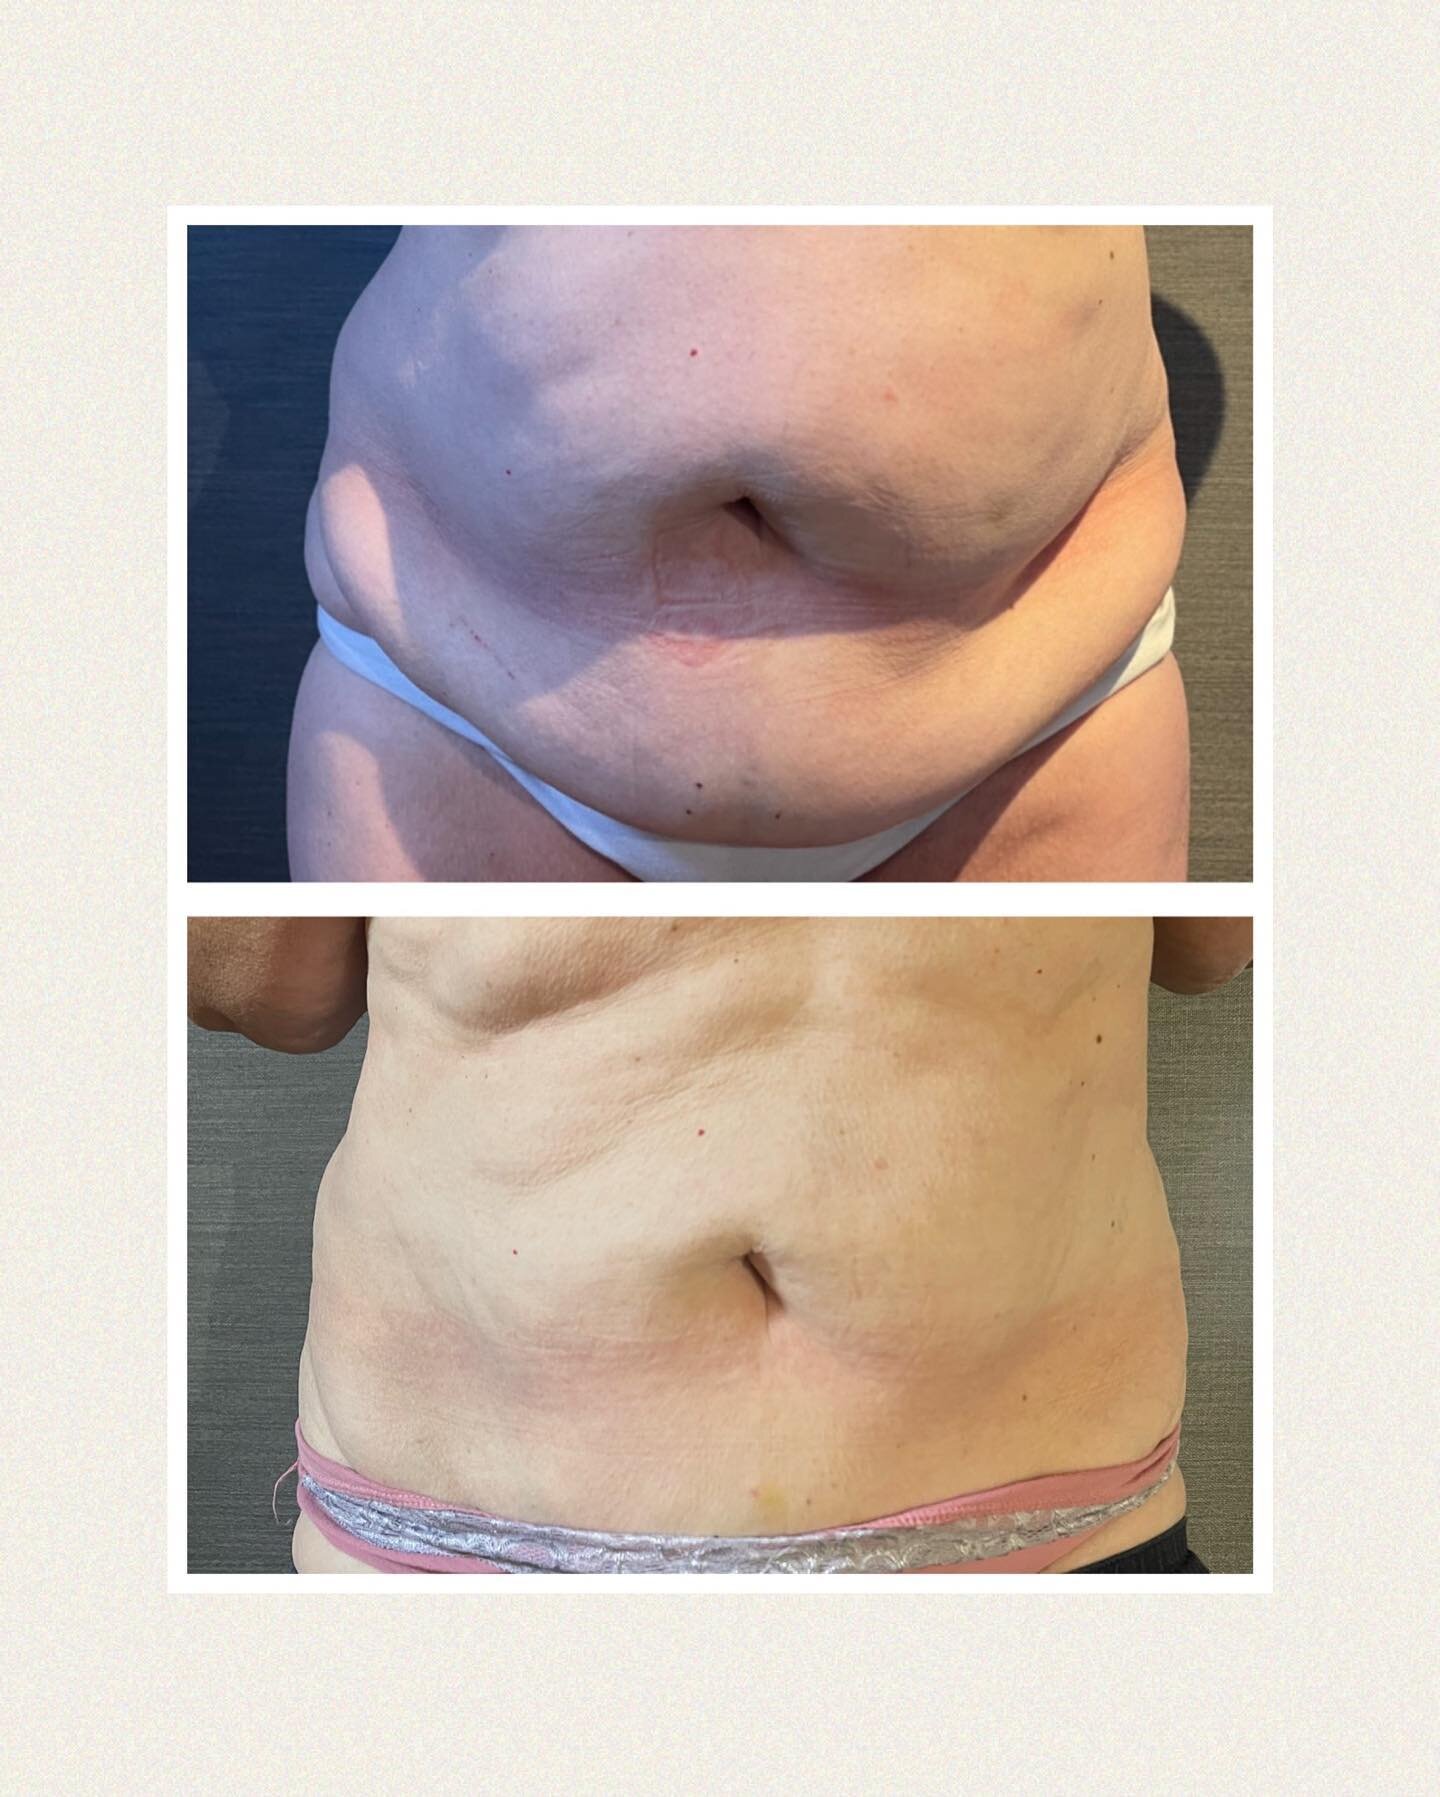 An amazing result using my Cryolipolysis machine to remove stubborn areas of fat. 
This was after two sessions and I can safely say my client is thrilled. She&rsquo;s already deciding where to treat next 😊 

To see if this treatment is suitable for 